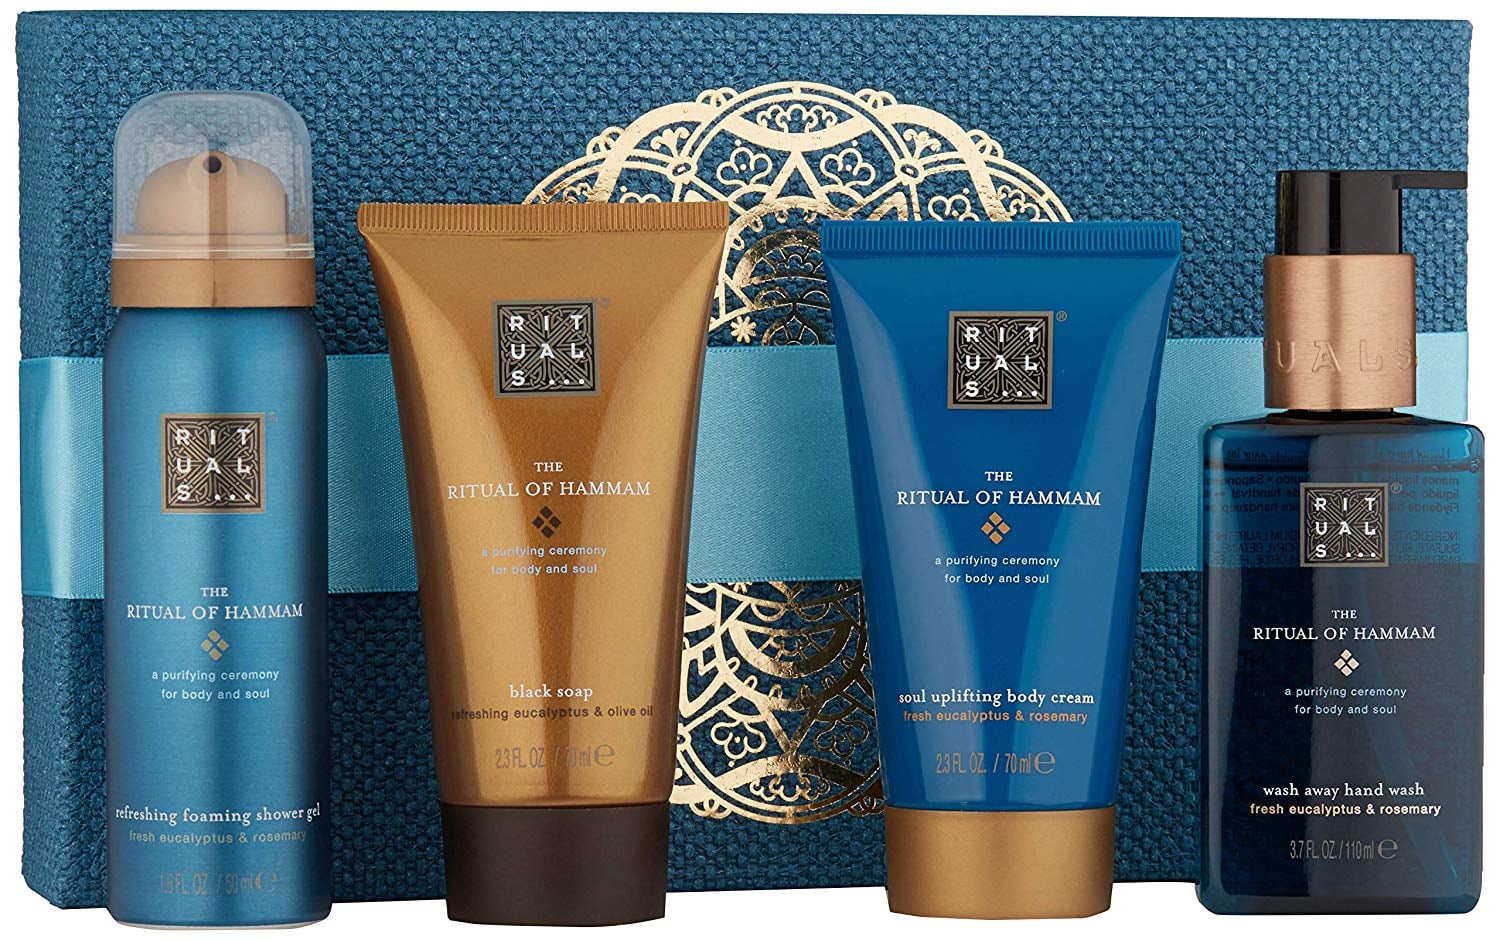 Rituals The Ritual of Hammam Gift Set | We Forgot Christmas Is Next Week, Too, but Amazon Has Great Beauty Gifts | POPSUGAR Beauty Photo 7